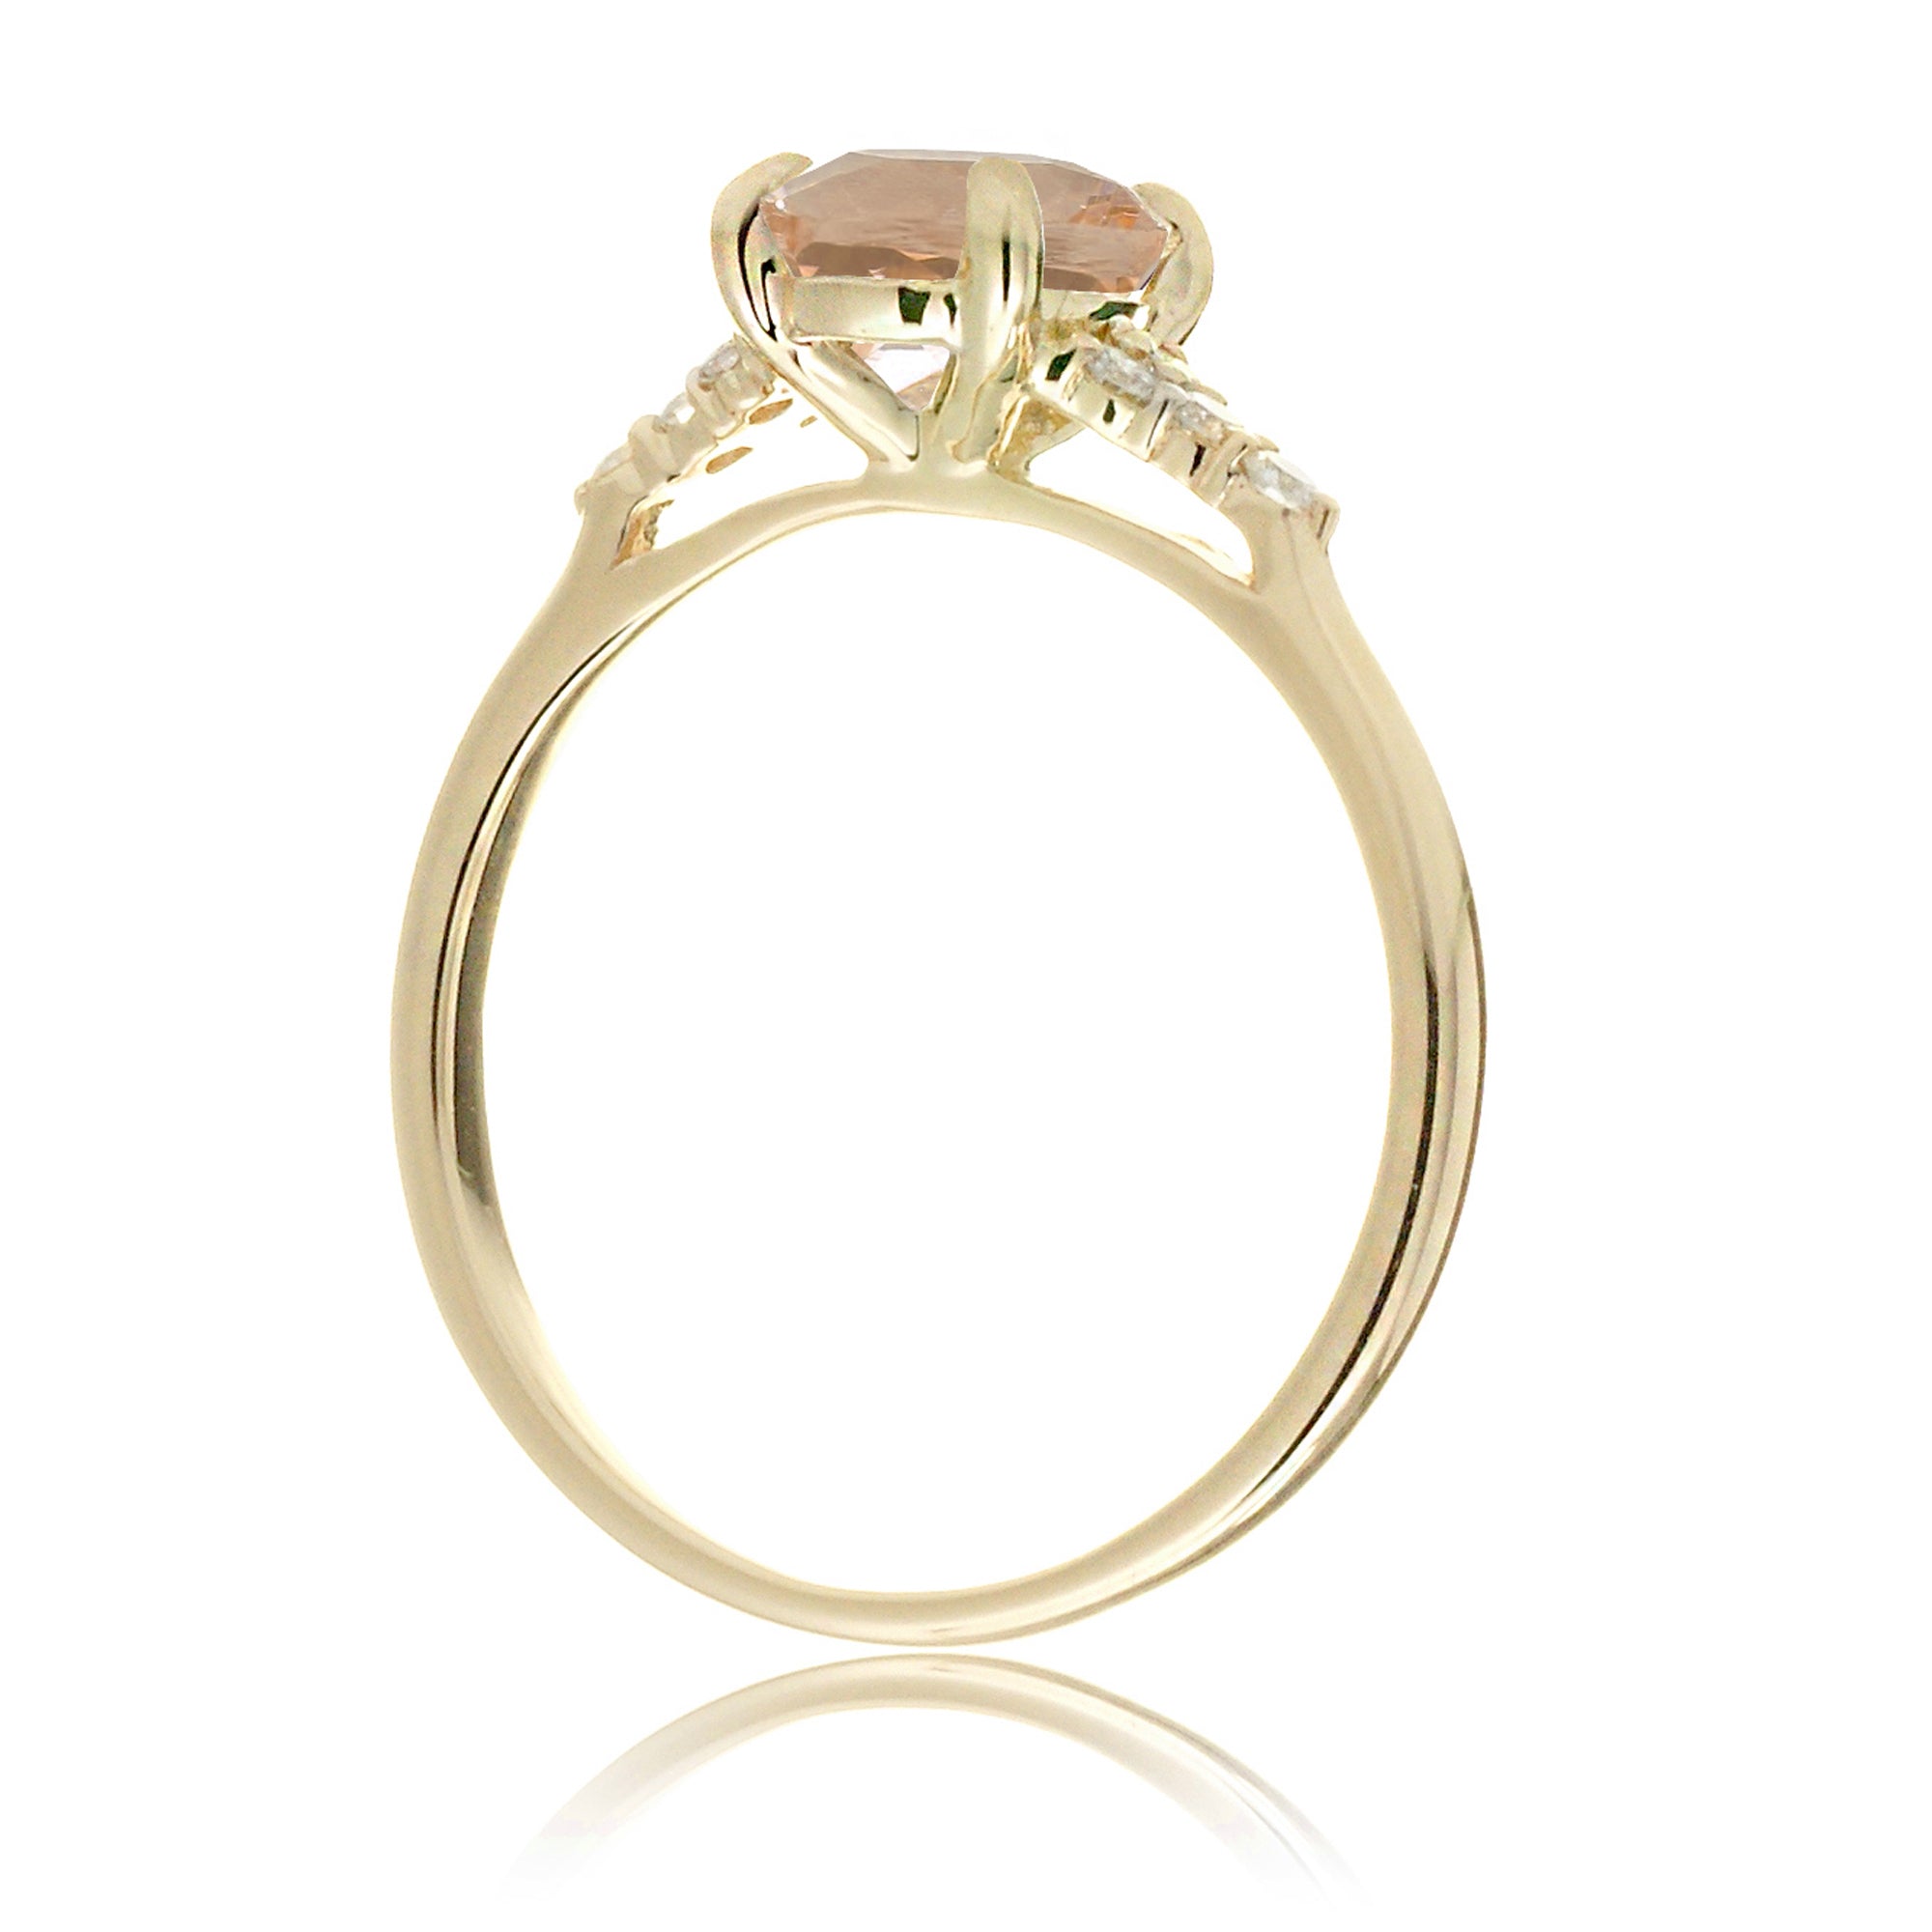 Pear cut natural morganite and diamond engagement ring in yellow gold - the Chloe